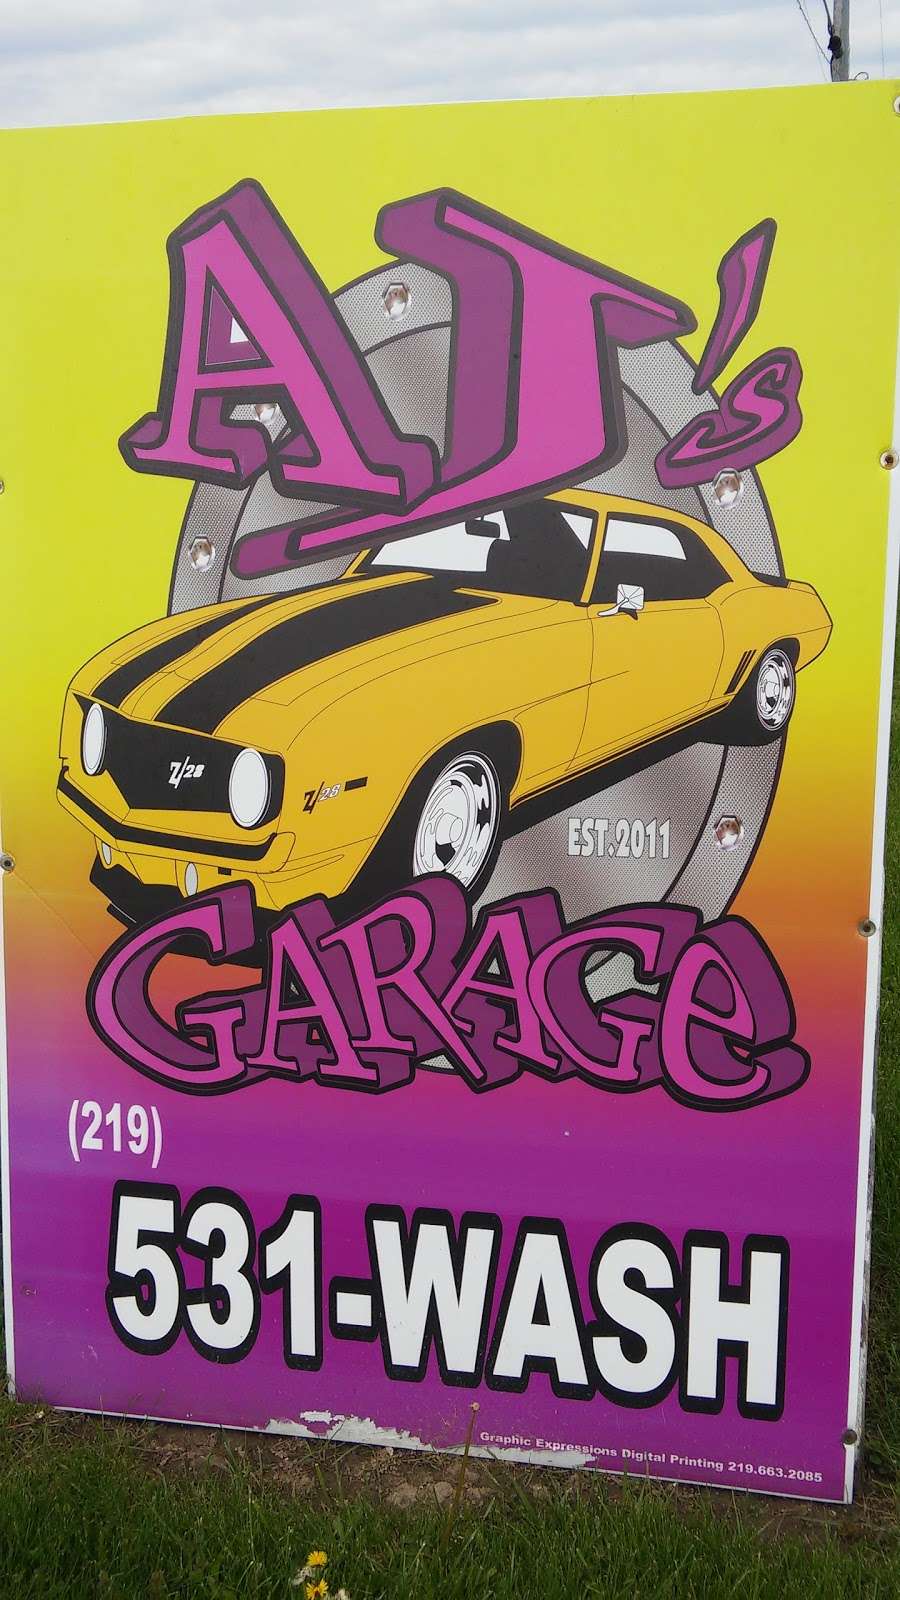 AJs Garage | 1556 W Lincolnway #1, Valparaiso, IN 46385 | Phone: (219) 531-9274